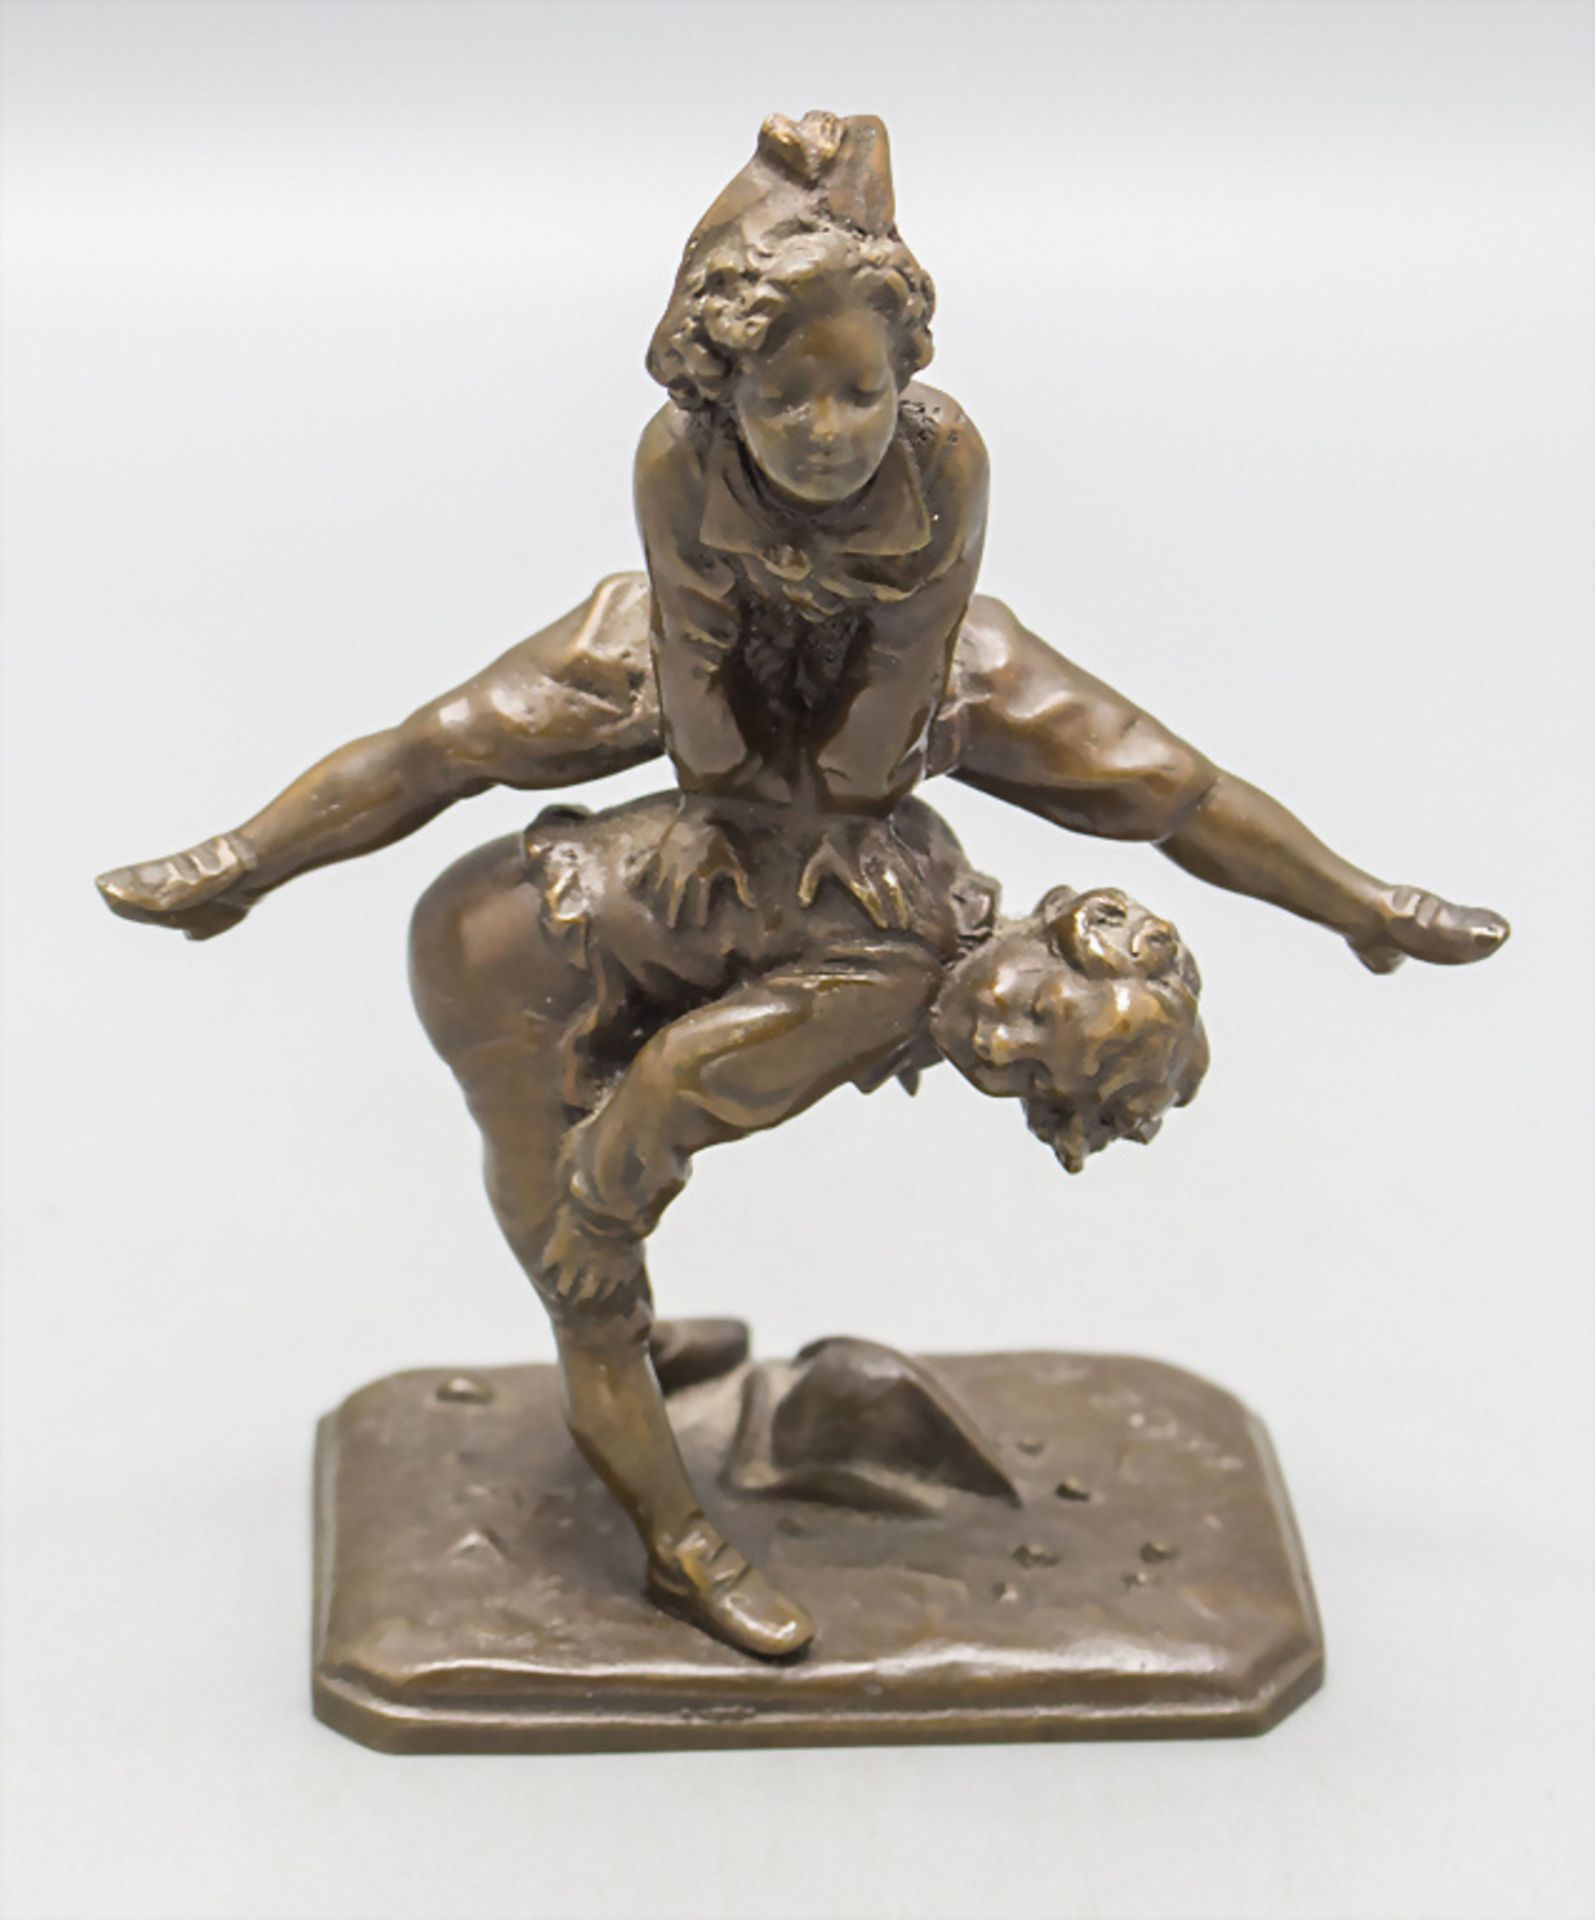 Bronzeplastik 'Spielende Jungen' / A bronze figure 'Two boys playing with each other', ...